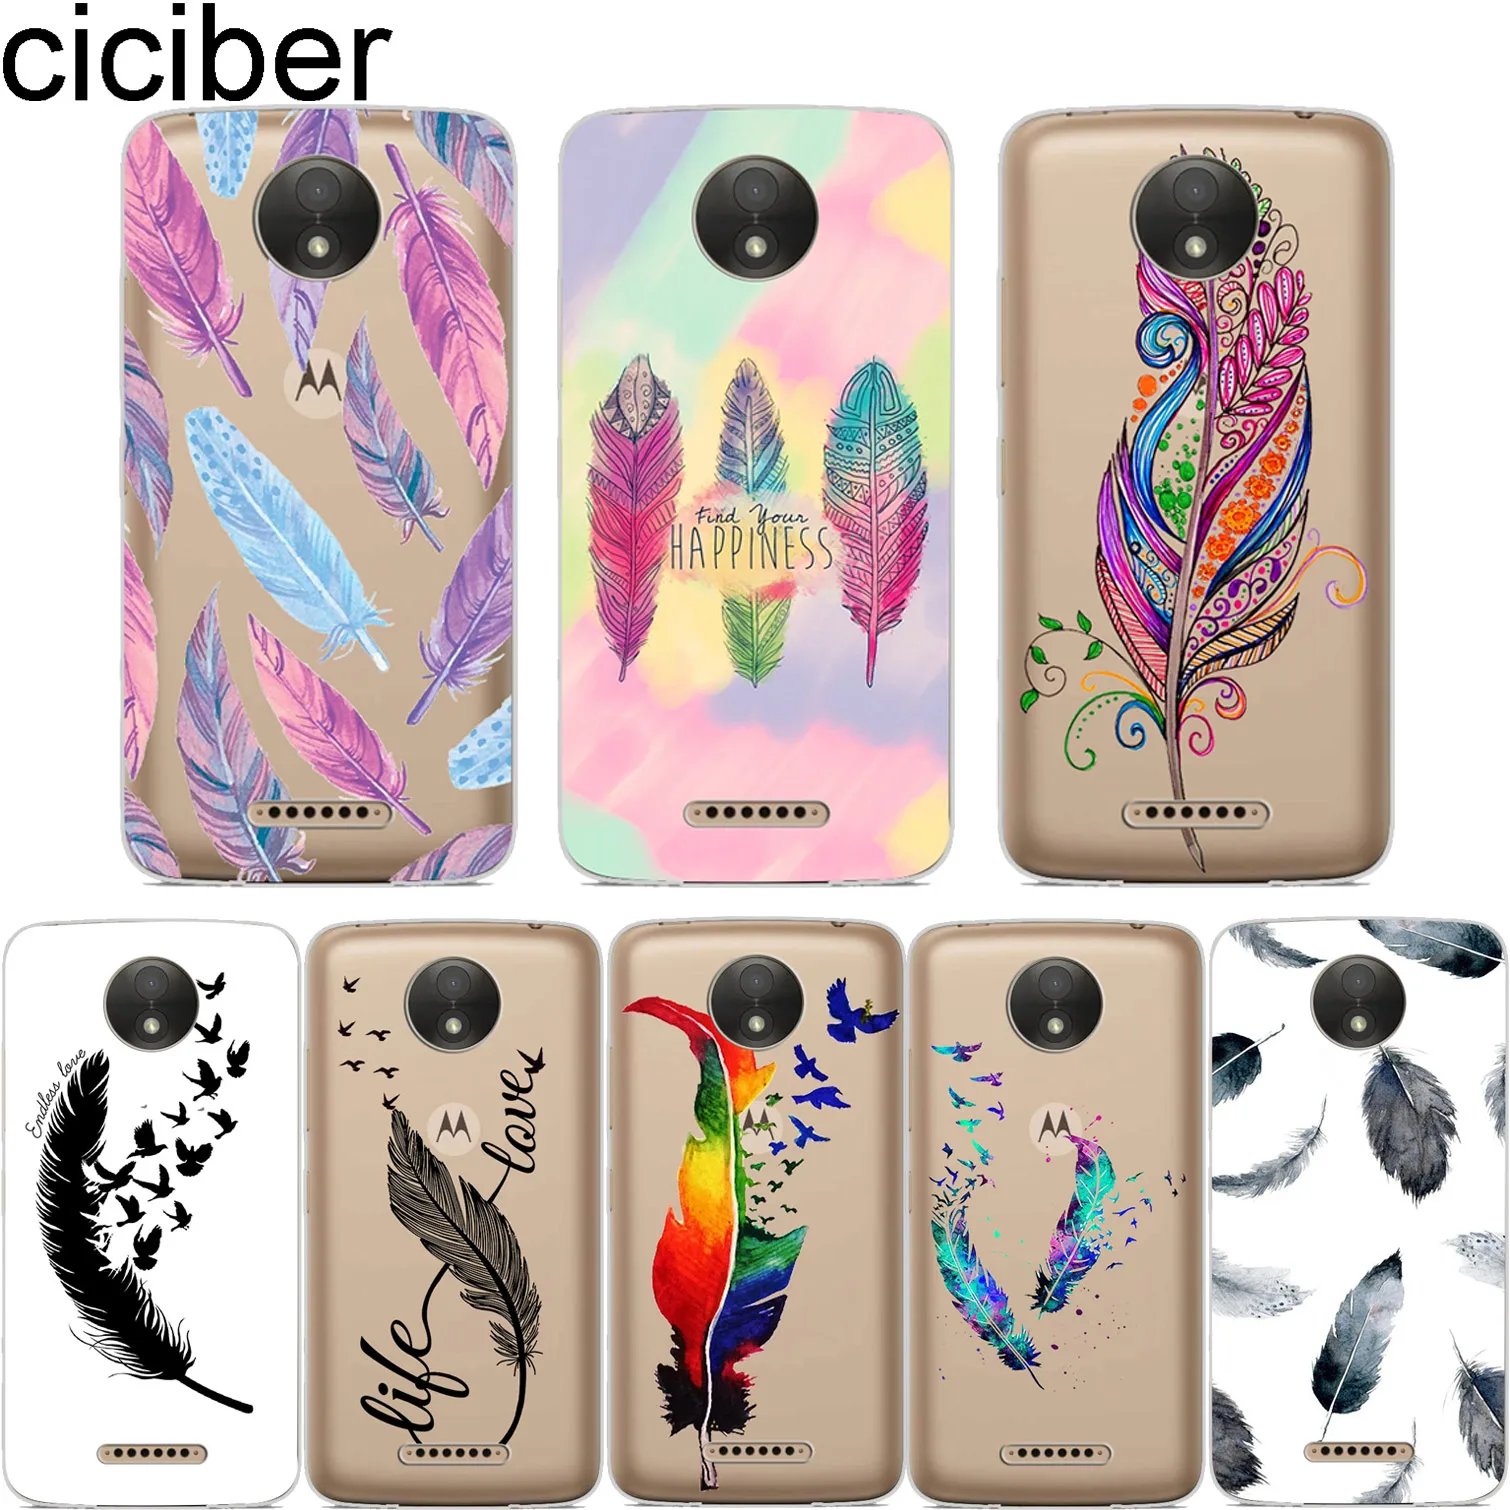 

ciciber Feather For Motorola Moto C Z2 Z3 ONE G4 G5 G5S G6 P30 E3 E4 E5 Plus Play Power X4 M Soft Silicone Clear TPU Phone Cases